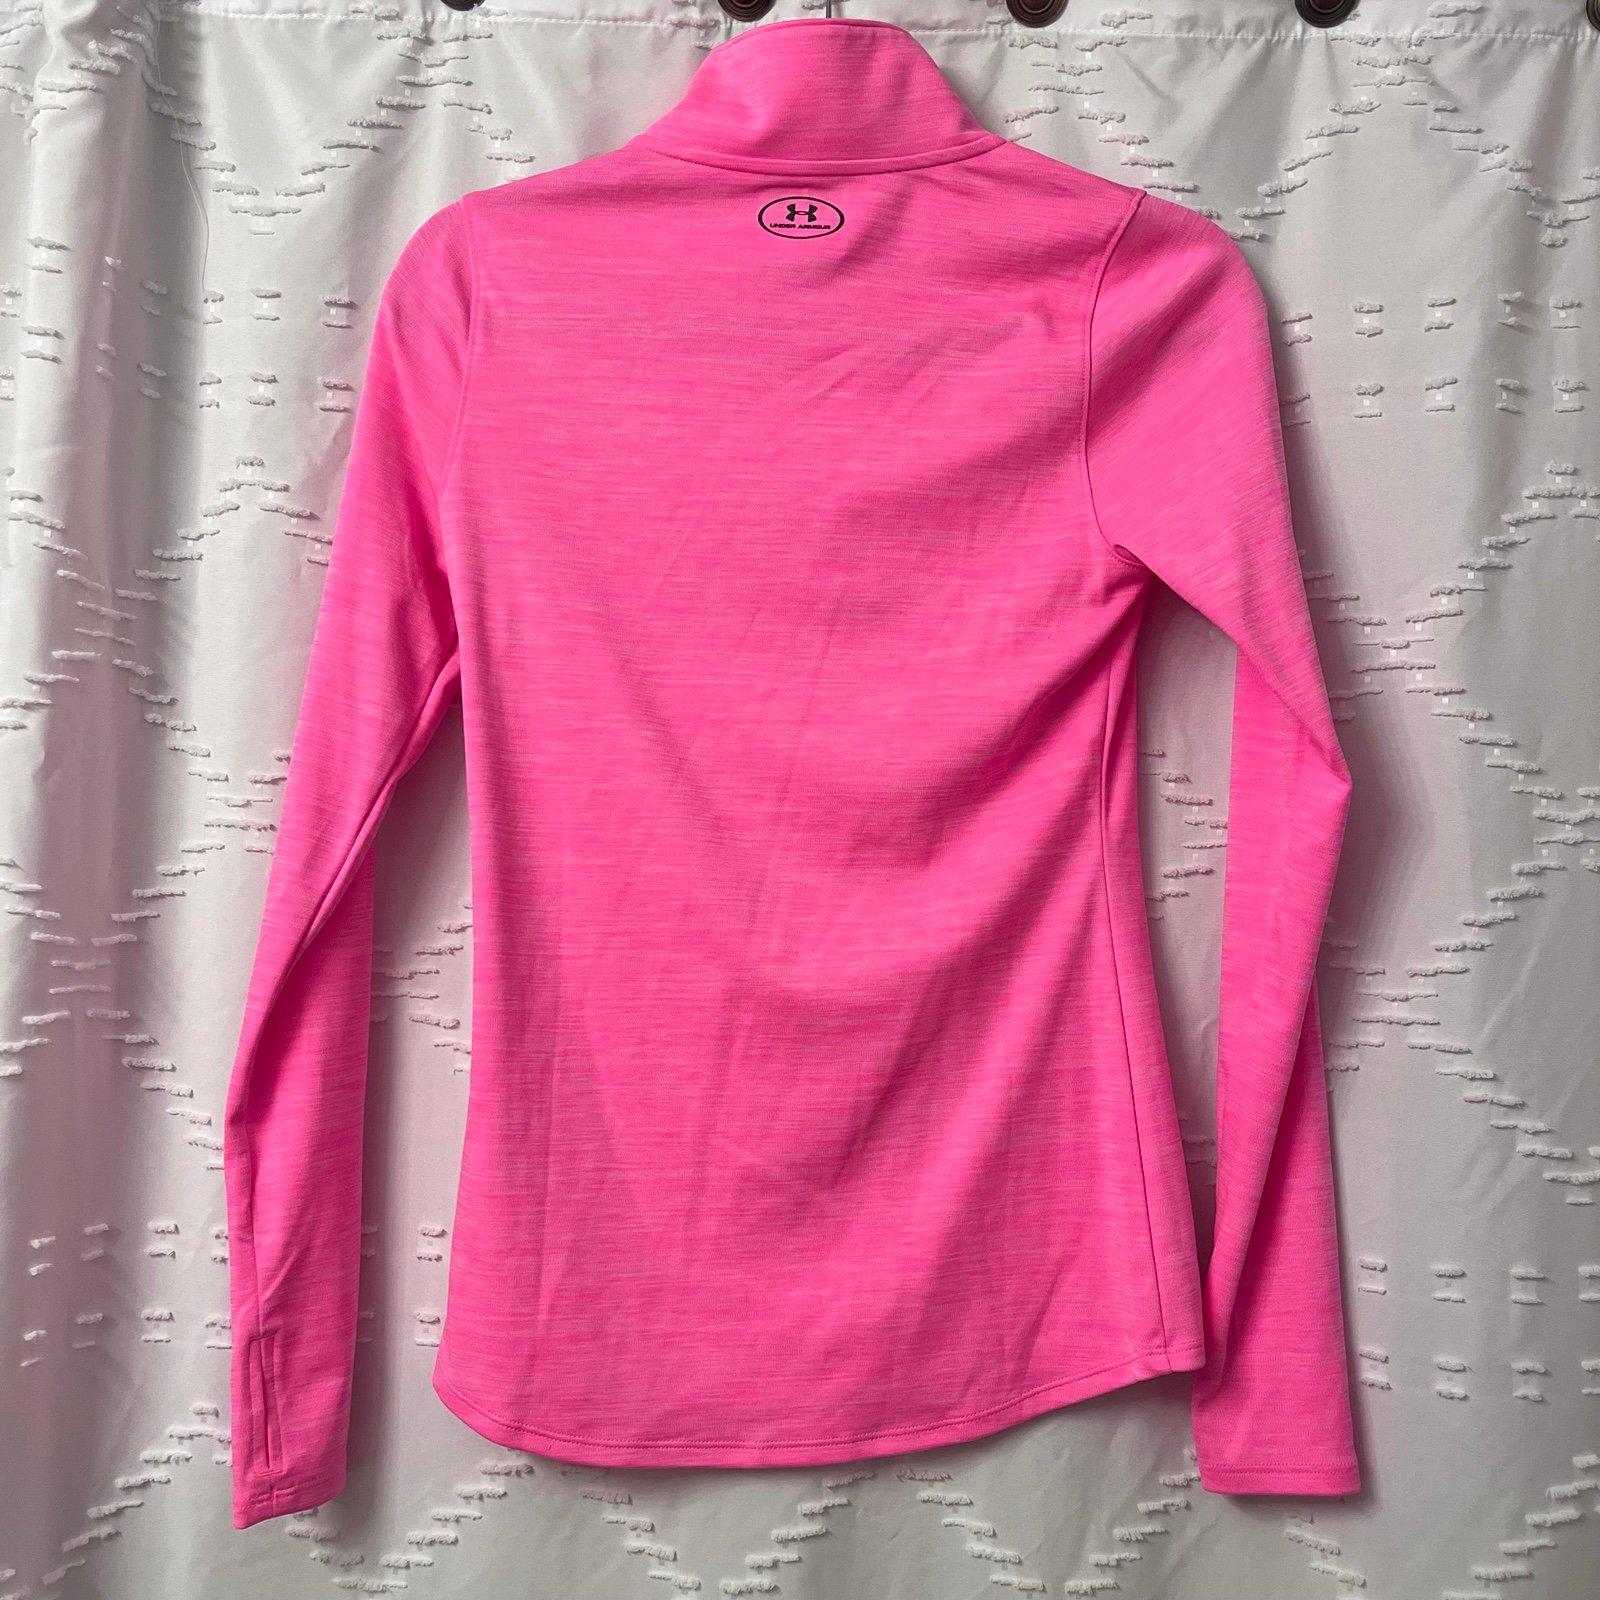 Amazing Pink Underarmour Athletic Jacket pBe3S3SFl US Outlet